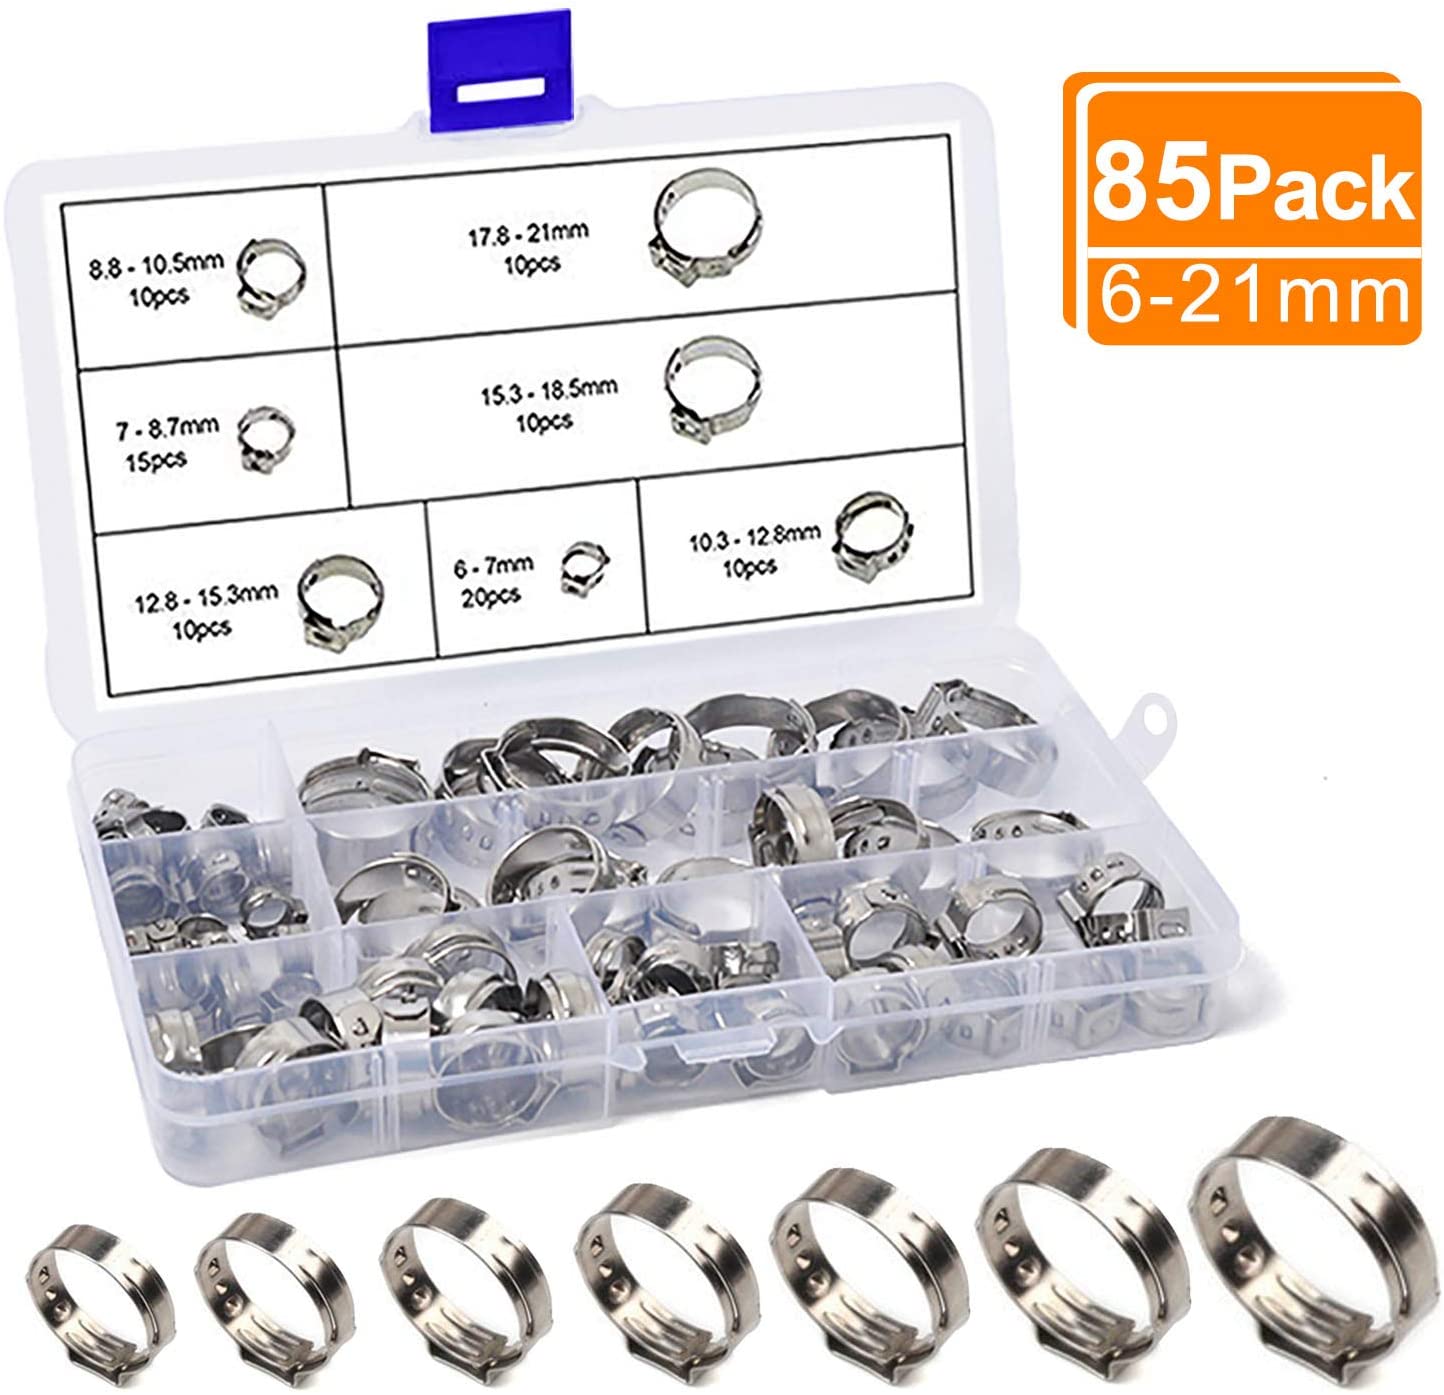 Pipes Hose Clips, AOBETAK 85 PCS 6-21mm Hose Pipe Clamp,304 Stainless Steel Adjustable Single Ear Stepless Clamps Rings, with Storage Case